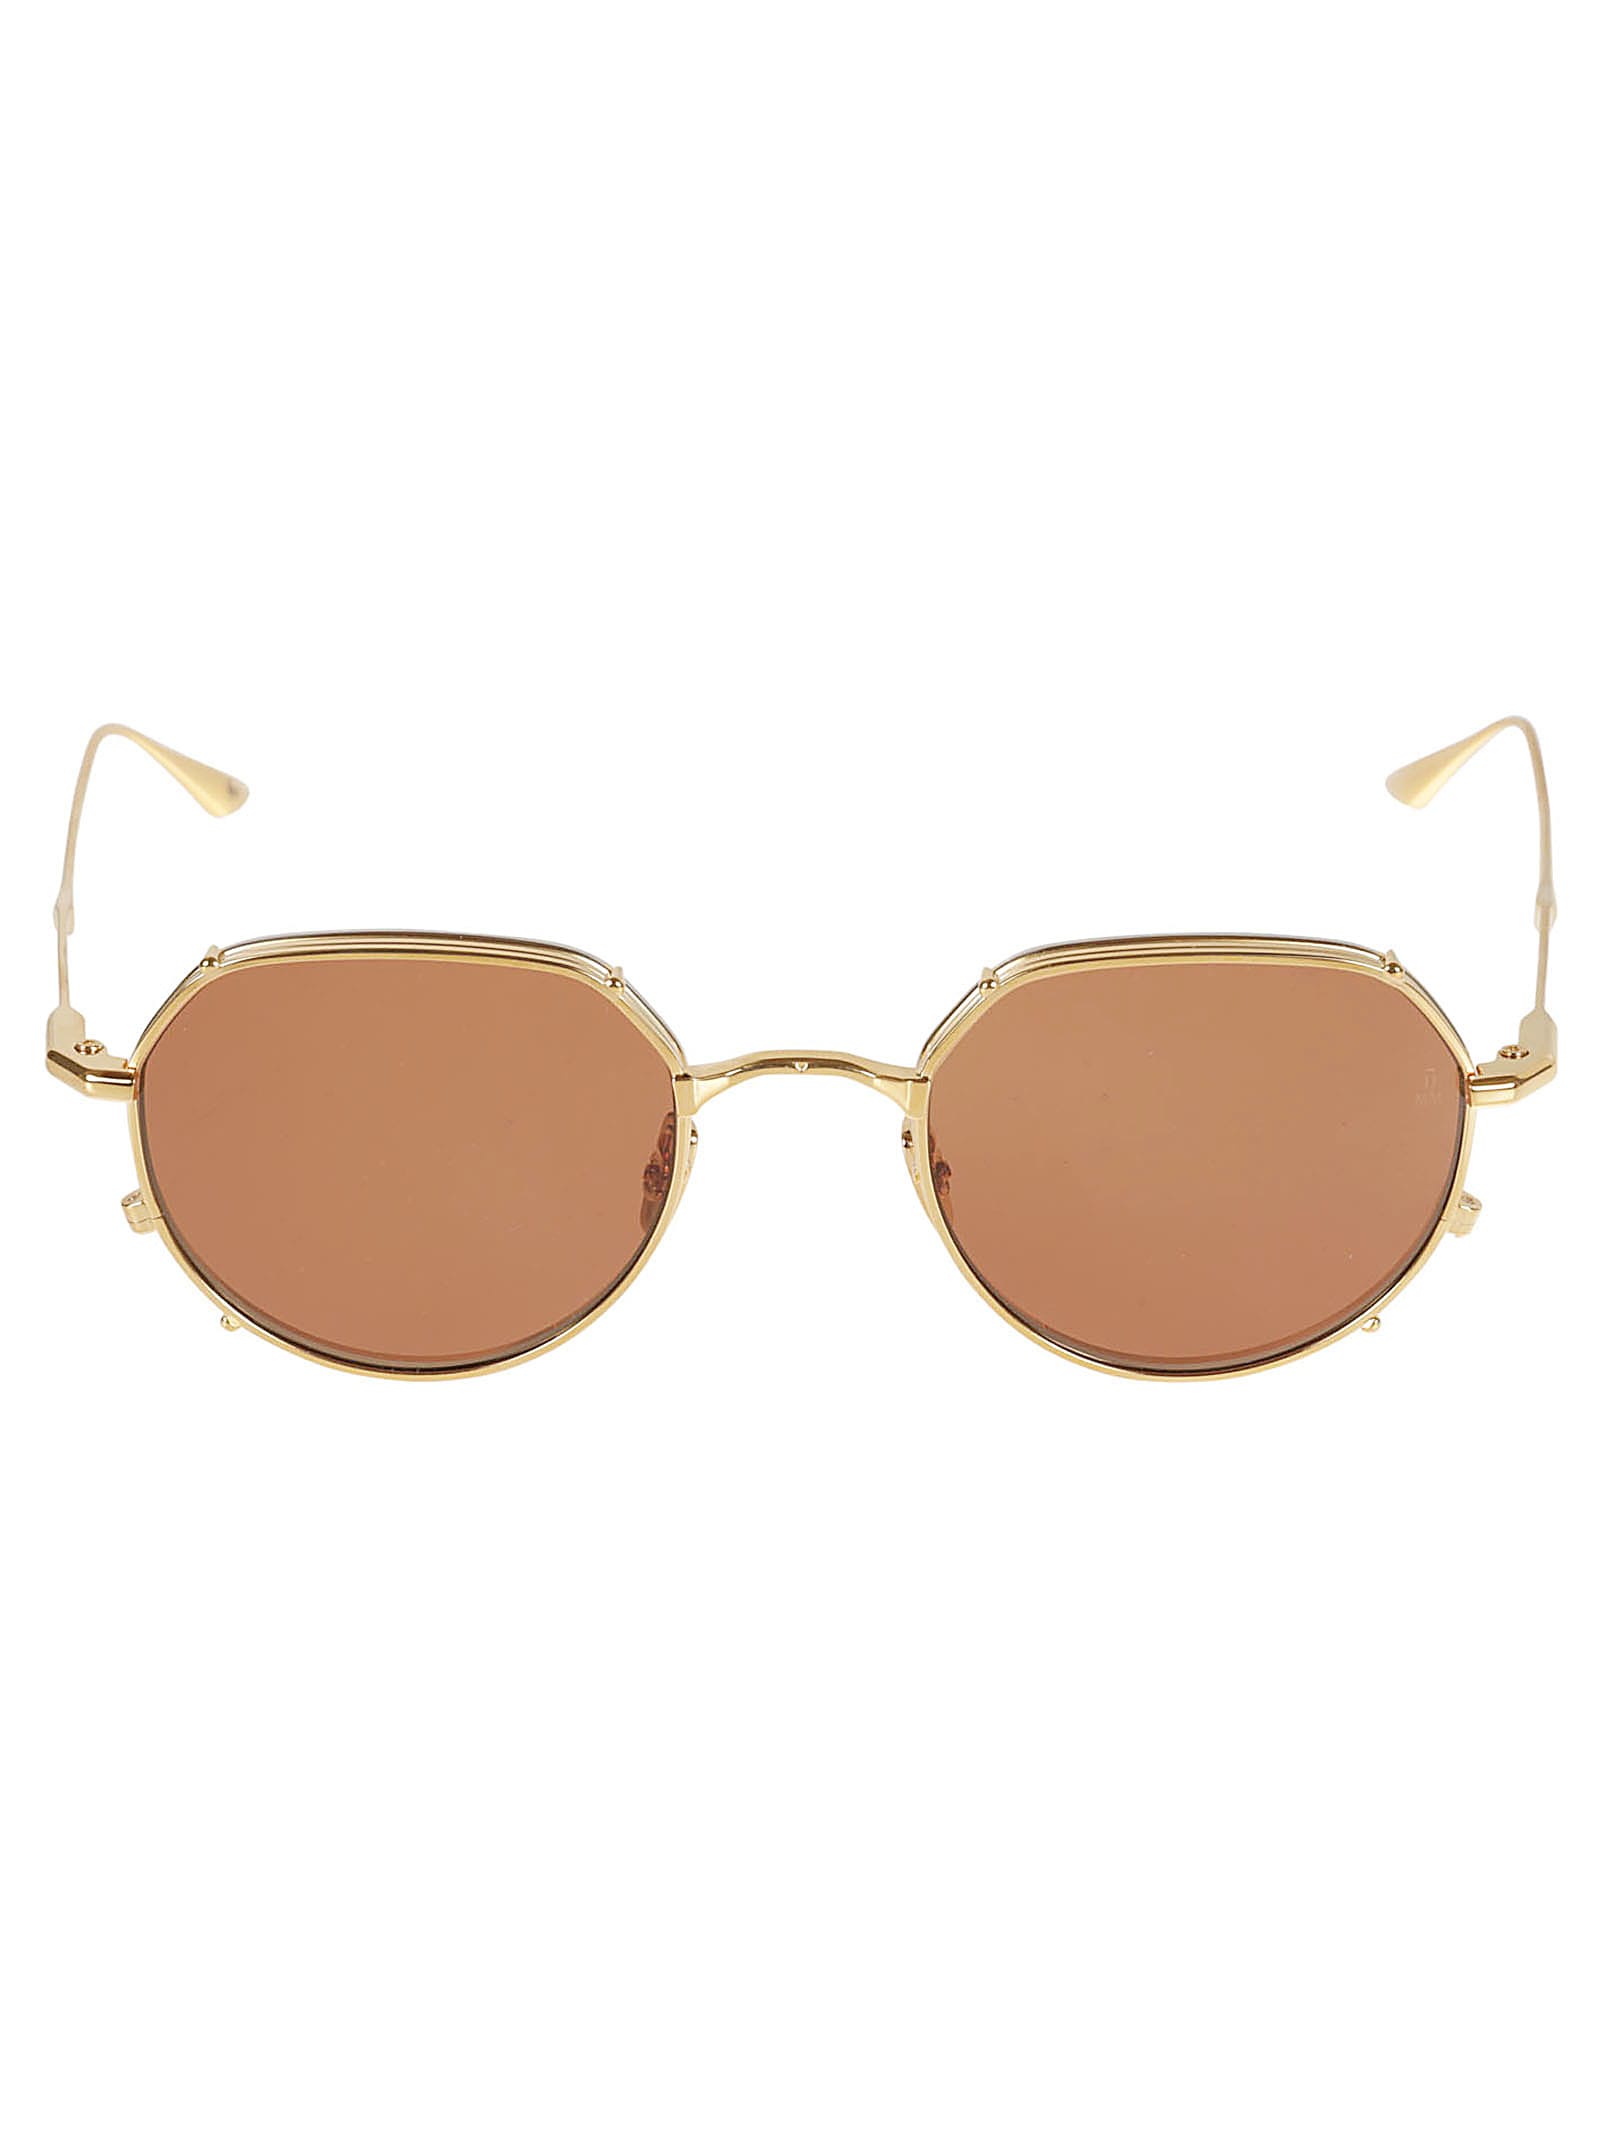 Jacques Marie Mage Hartana Sunglasses In Gold/black